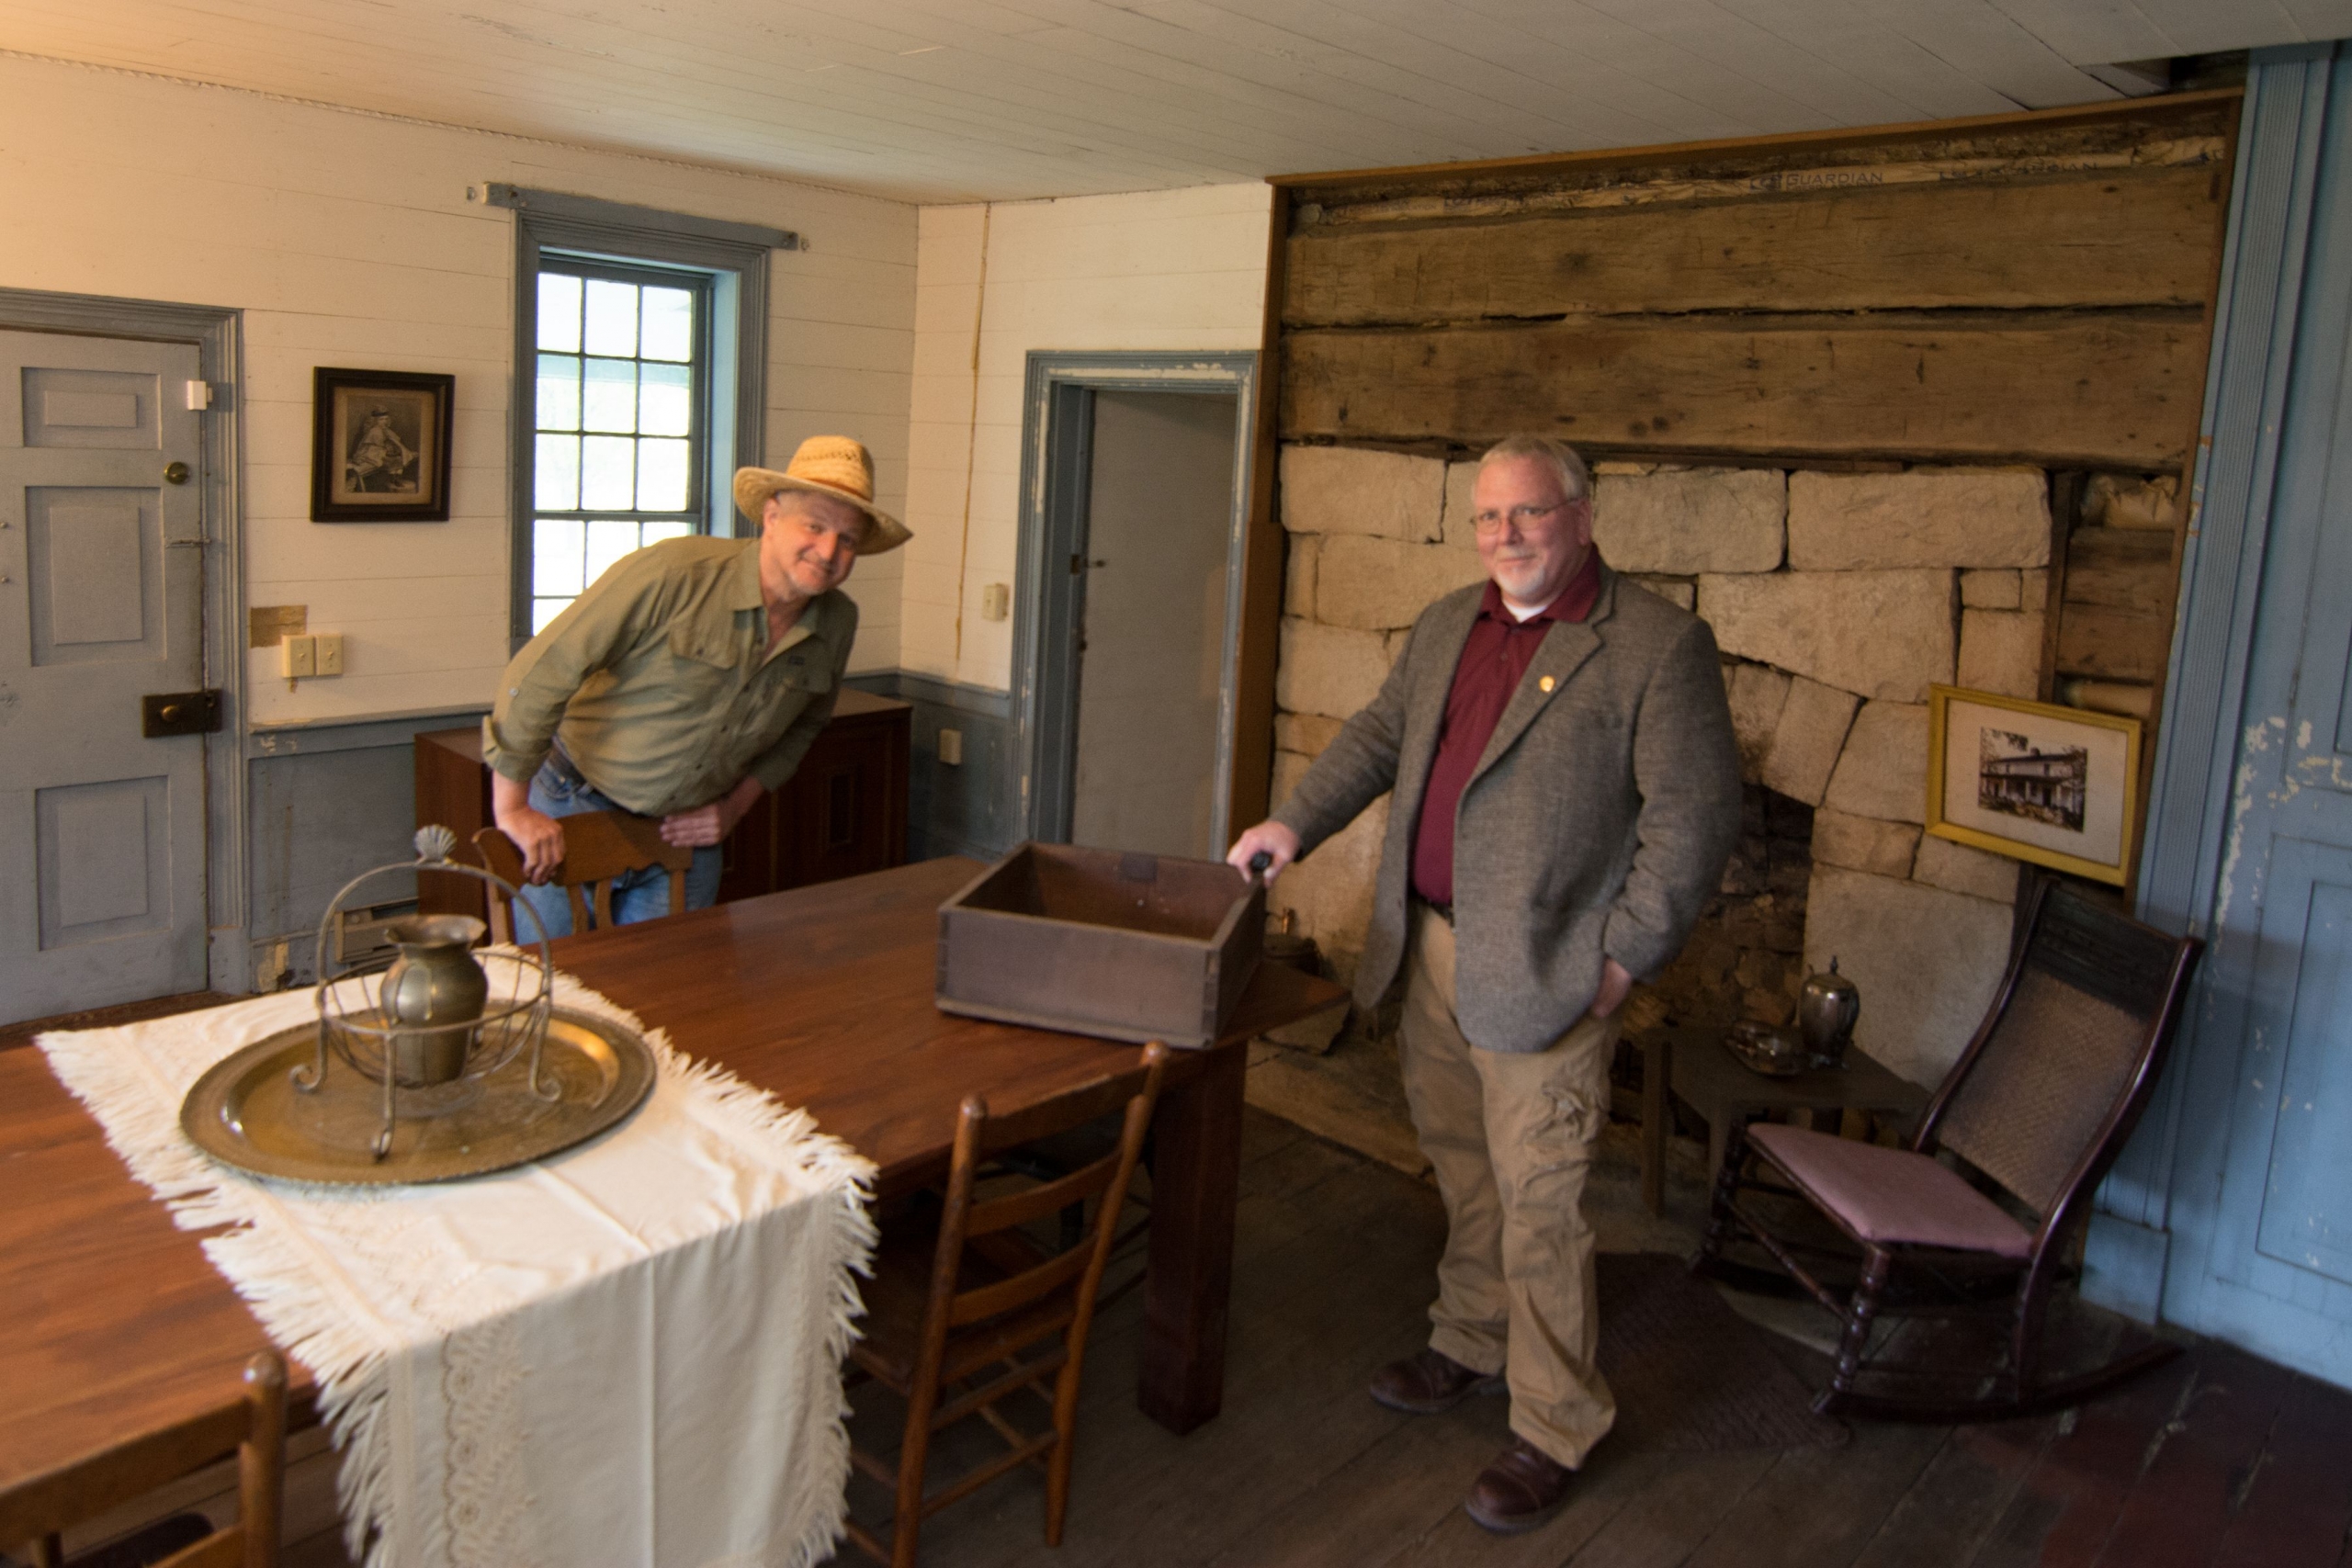 Sibray (left) and Burdette explore stonework and hewn timbers in one of the tavern rooms.